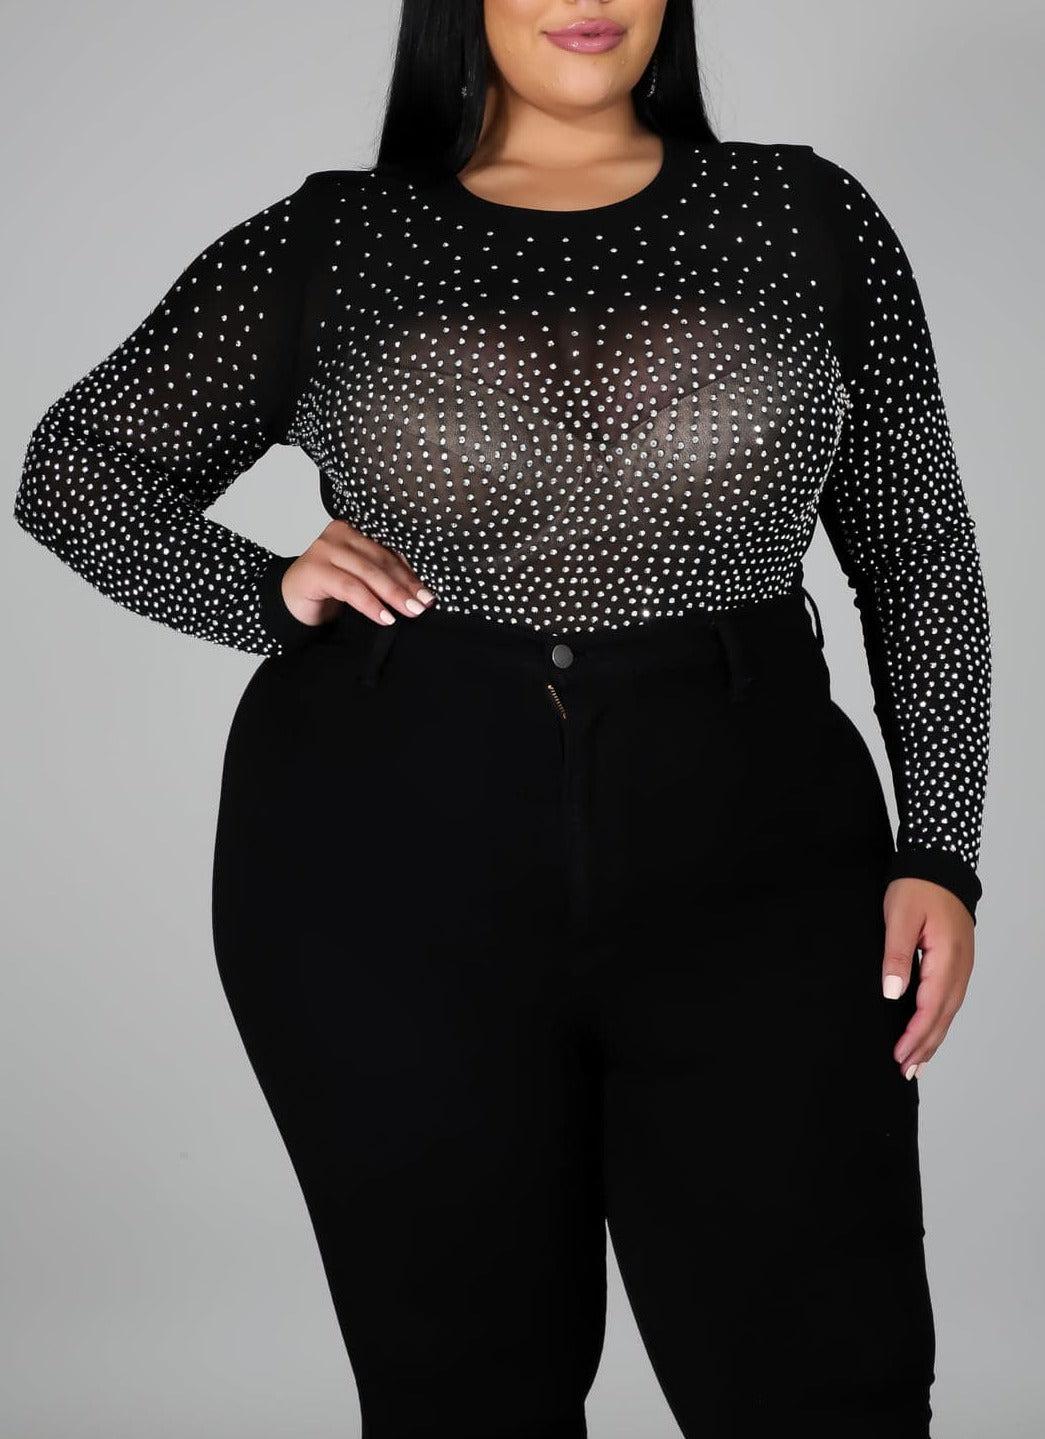 Stone Embellished Bodysuit (Curvy) - SASHAY COUTURE BOUTIQUE Apparel & Accessories